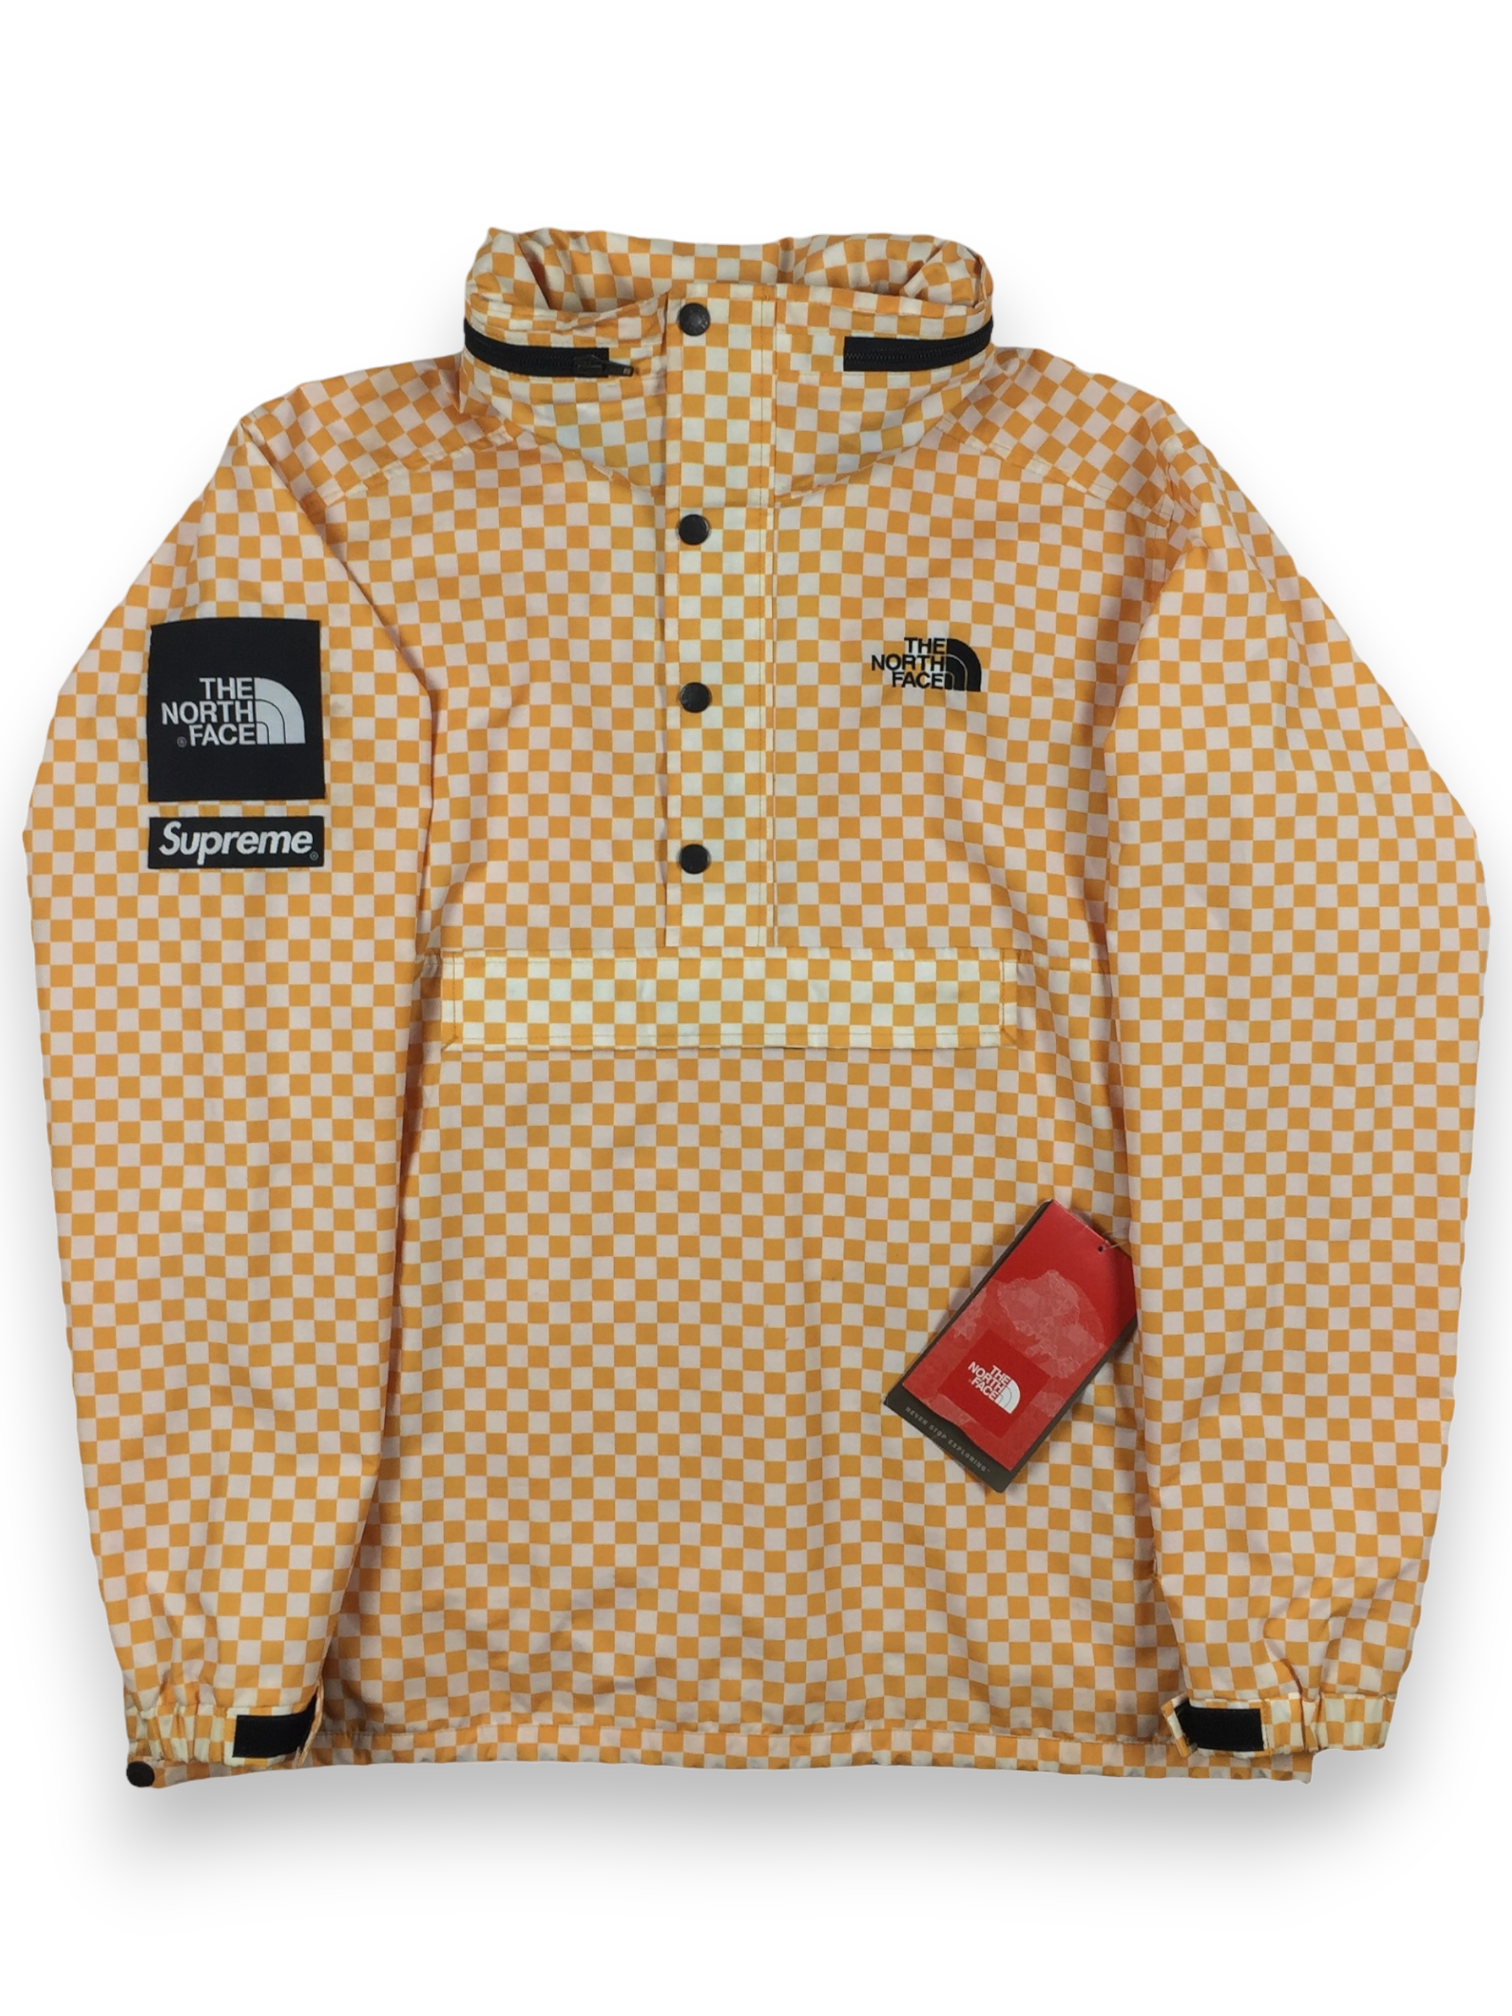 2011 Supreme x The North Face Checkered Yellow Pullover